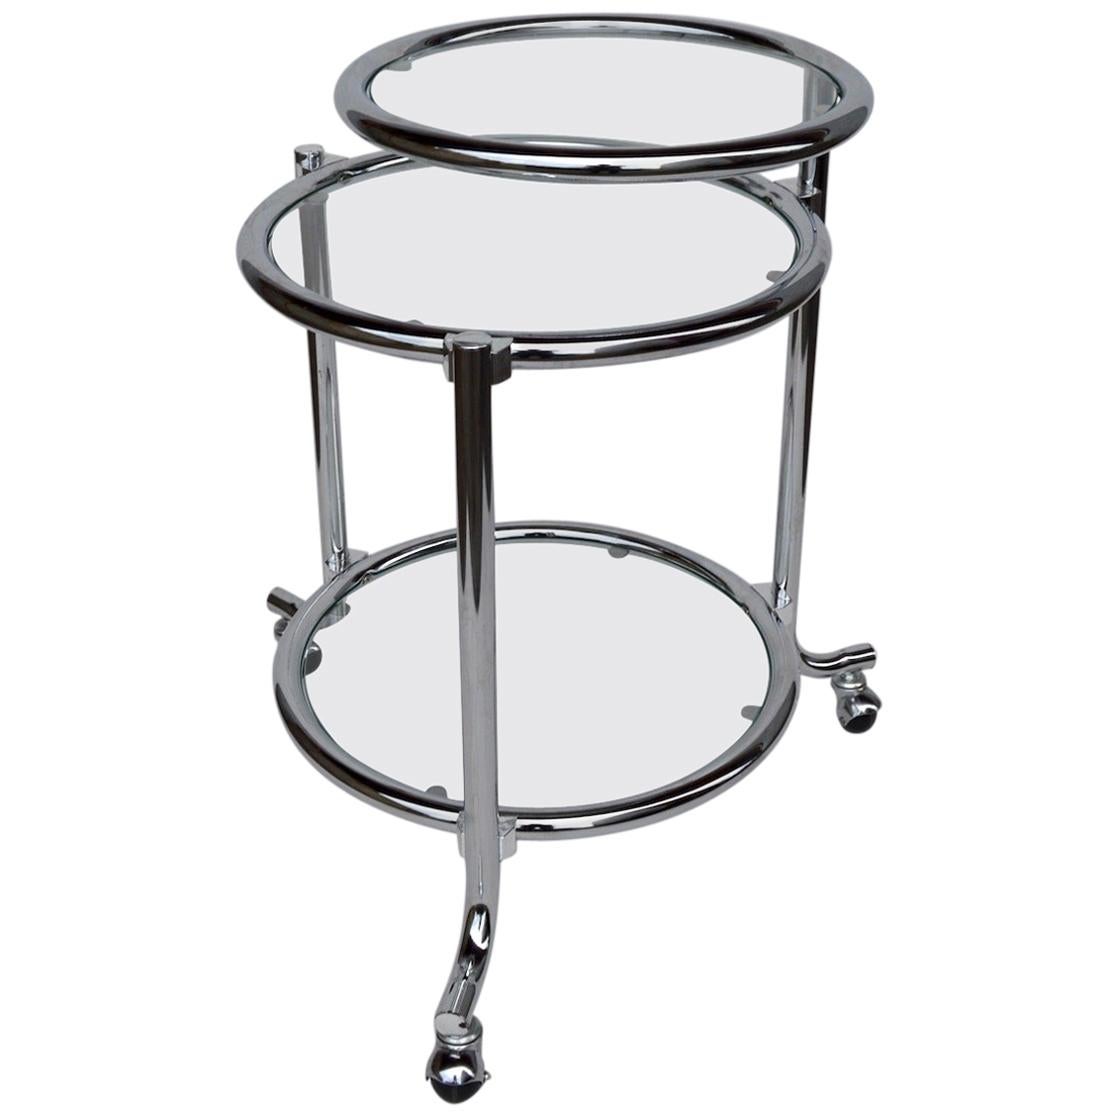 Rolling Chrome Bar Serving Cart with Chrome Rings